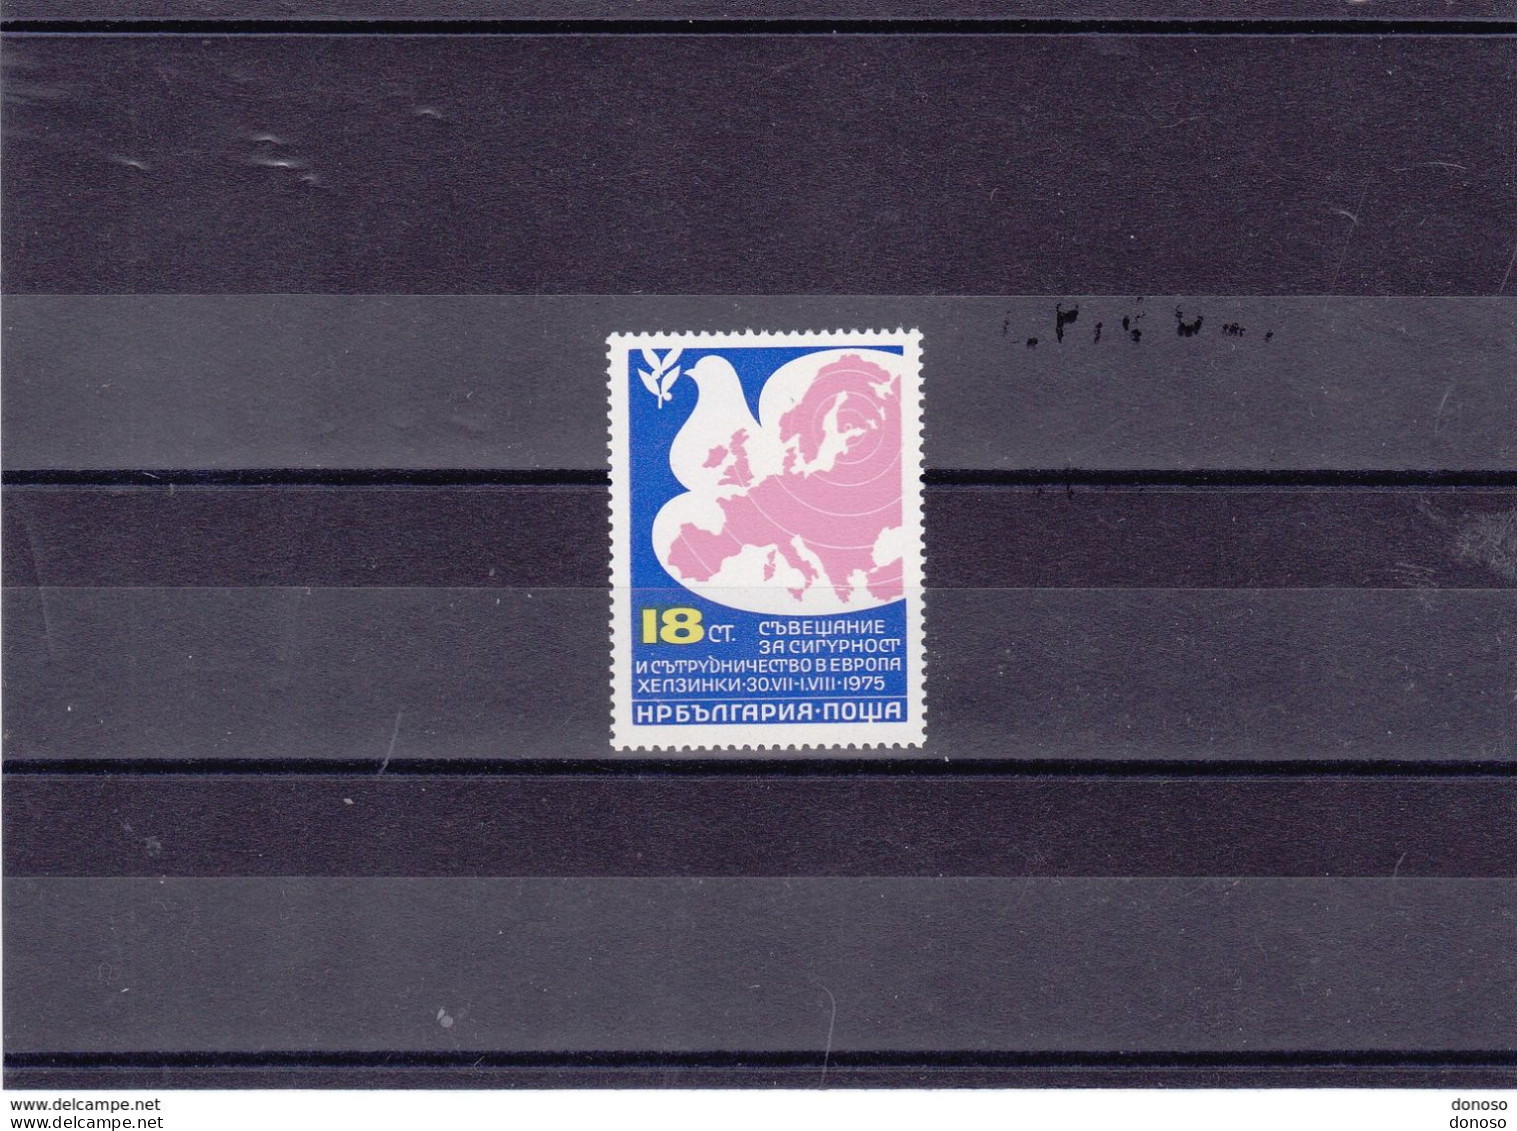 BULGARIE 1975 CONFERENCE HELSINKI Michel 2434 NEUF** MNH - Unused Stamps